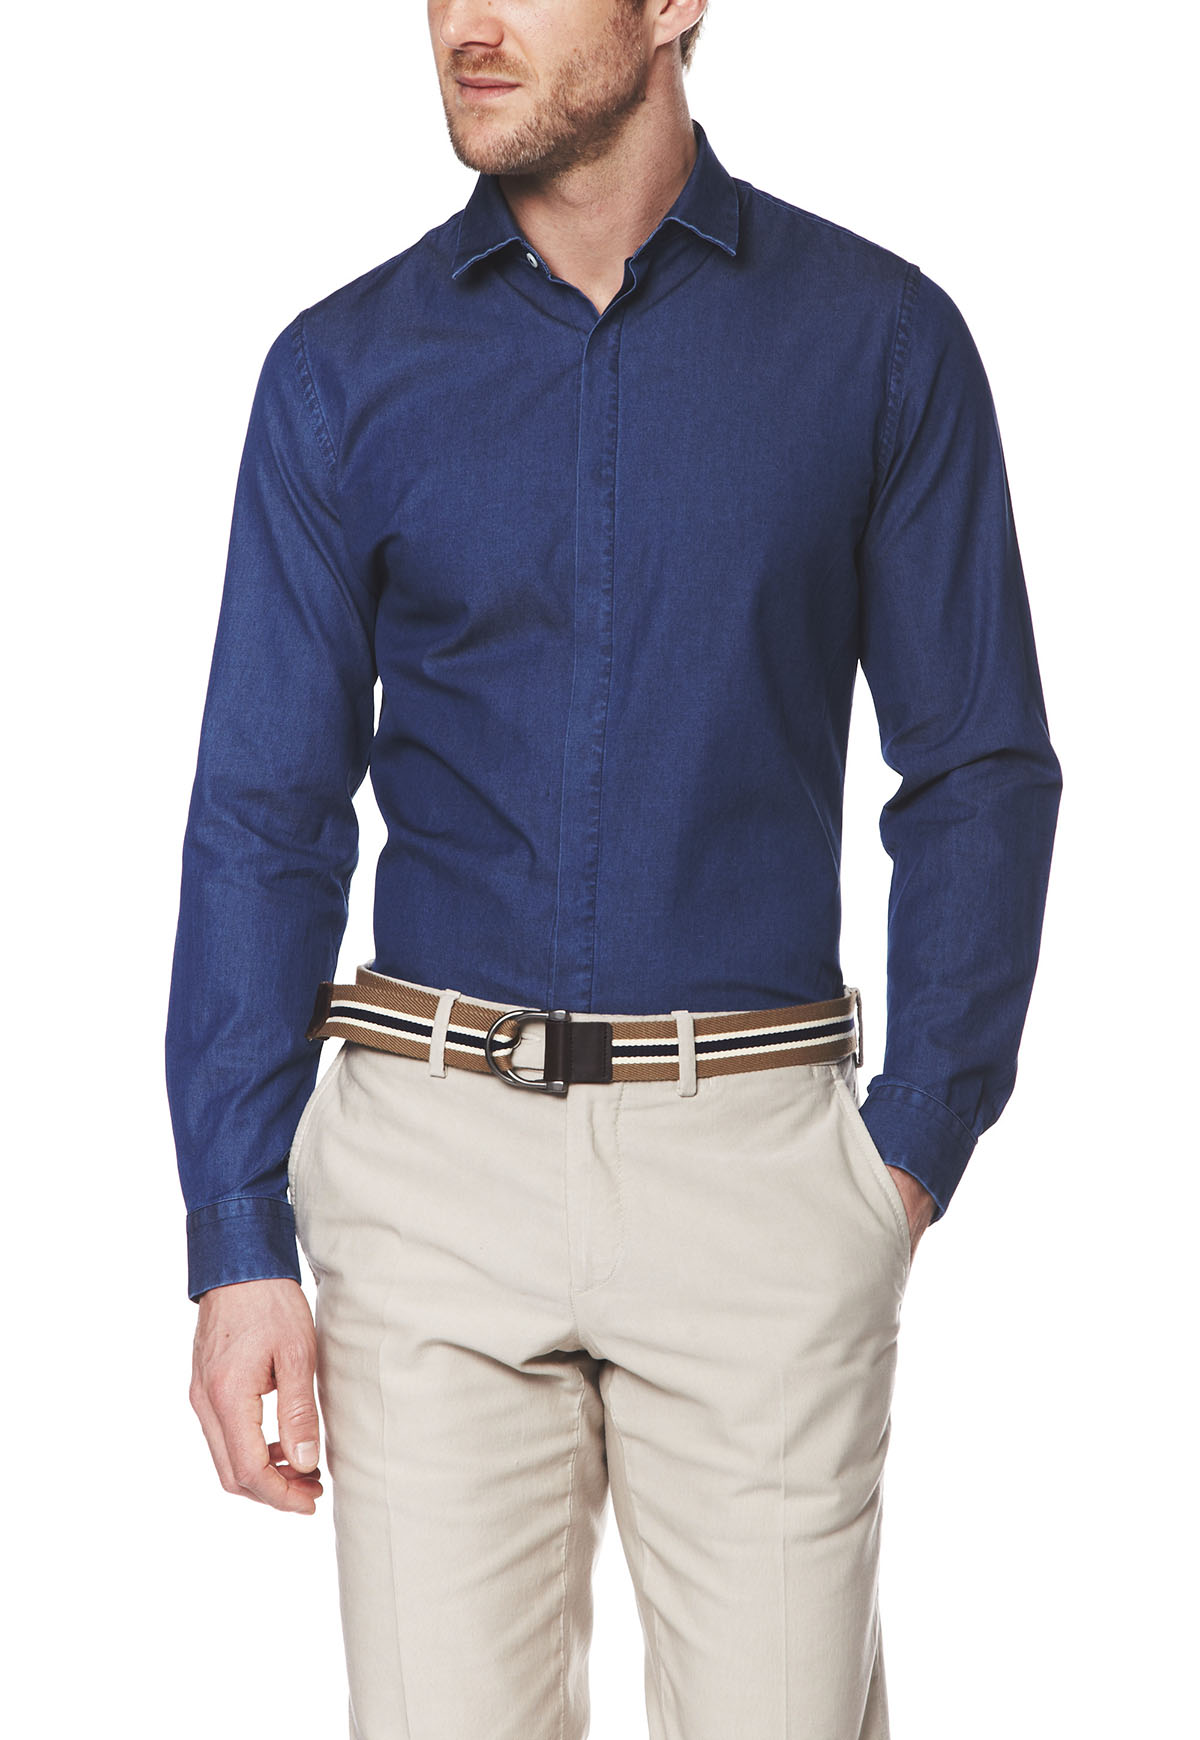 chemise-homme-manches-longues-coupe-extra-ajustee-antoine-twill-bleu-fonce-uni-coton-face-alain-figaret-an0520606866.jpg